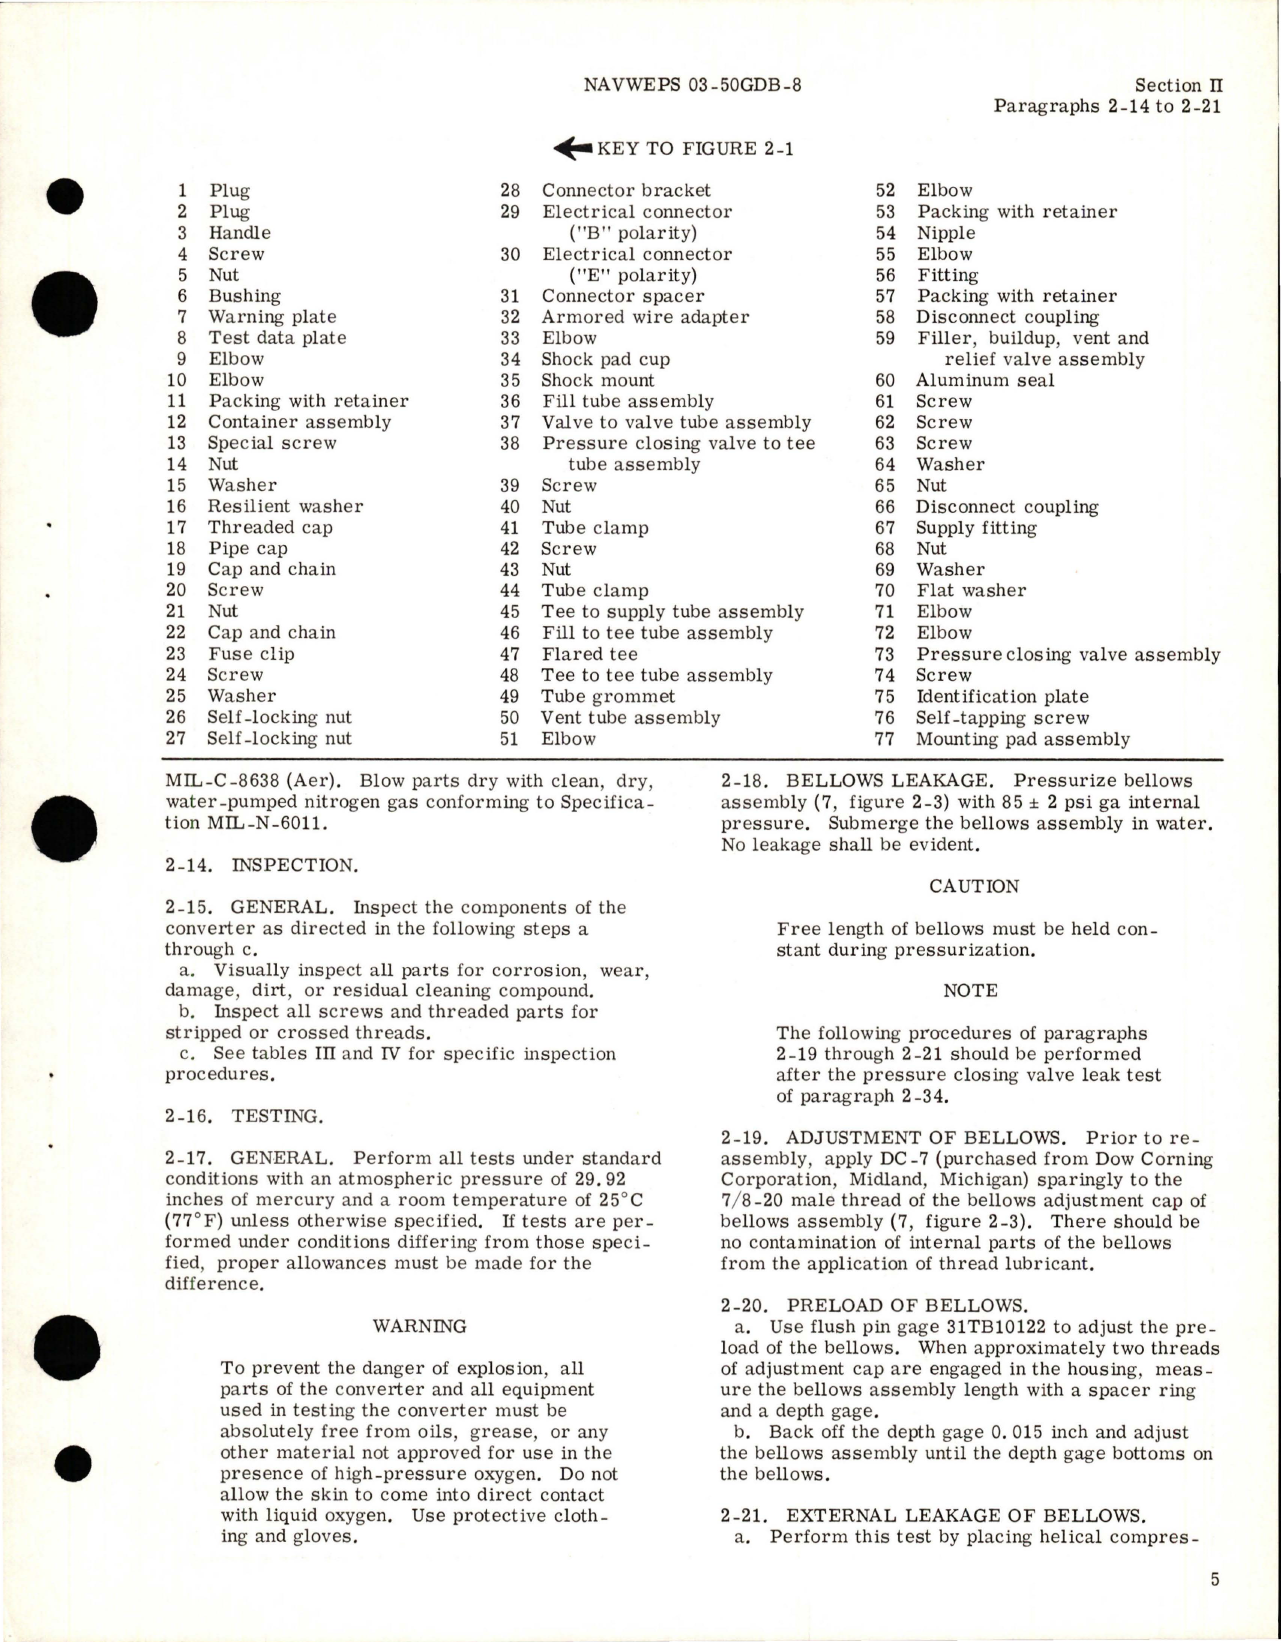 Sample page 9 from AirCorps Library document: Overhaul Instructions for Liquid Oxygen Converter - Part 29073-B1 and 29073-C1